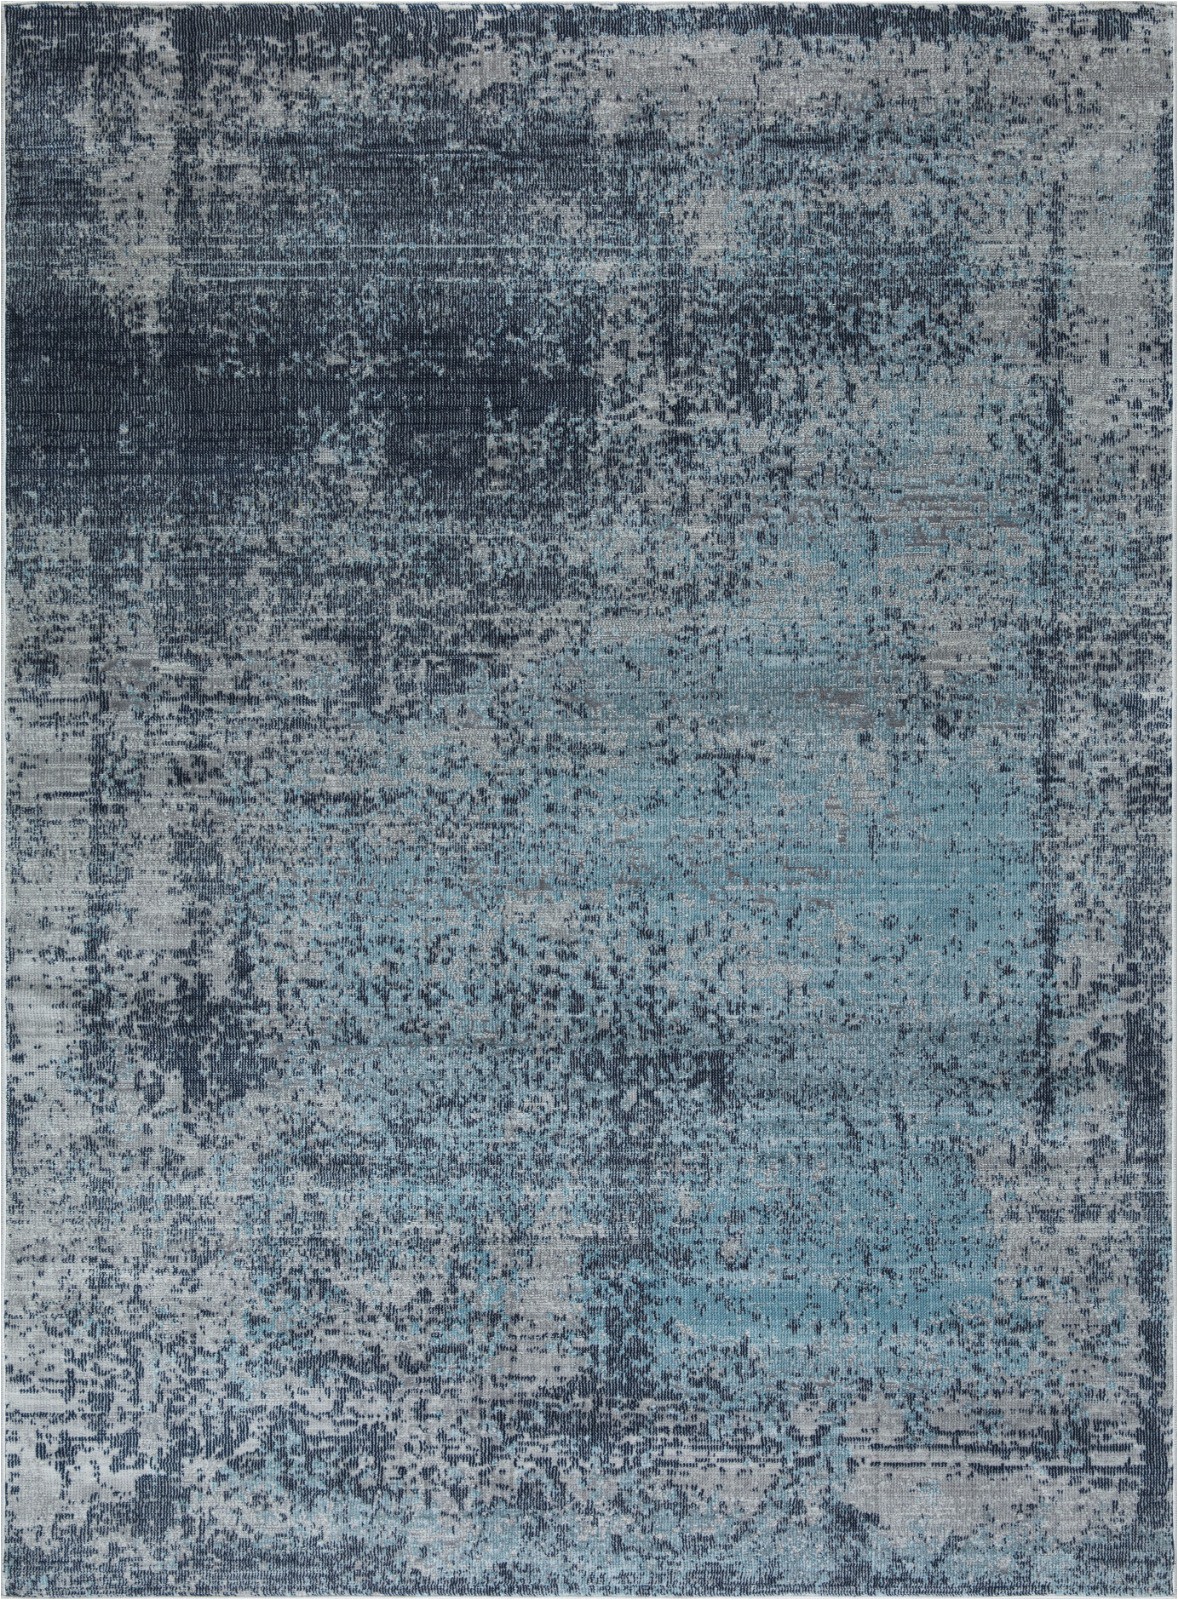 Modern Navy Blue Rug Mod Arte Mirage Collection area Rug Modern & Contemporary Style Abstract soft & Plush Navy Blue Gray